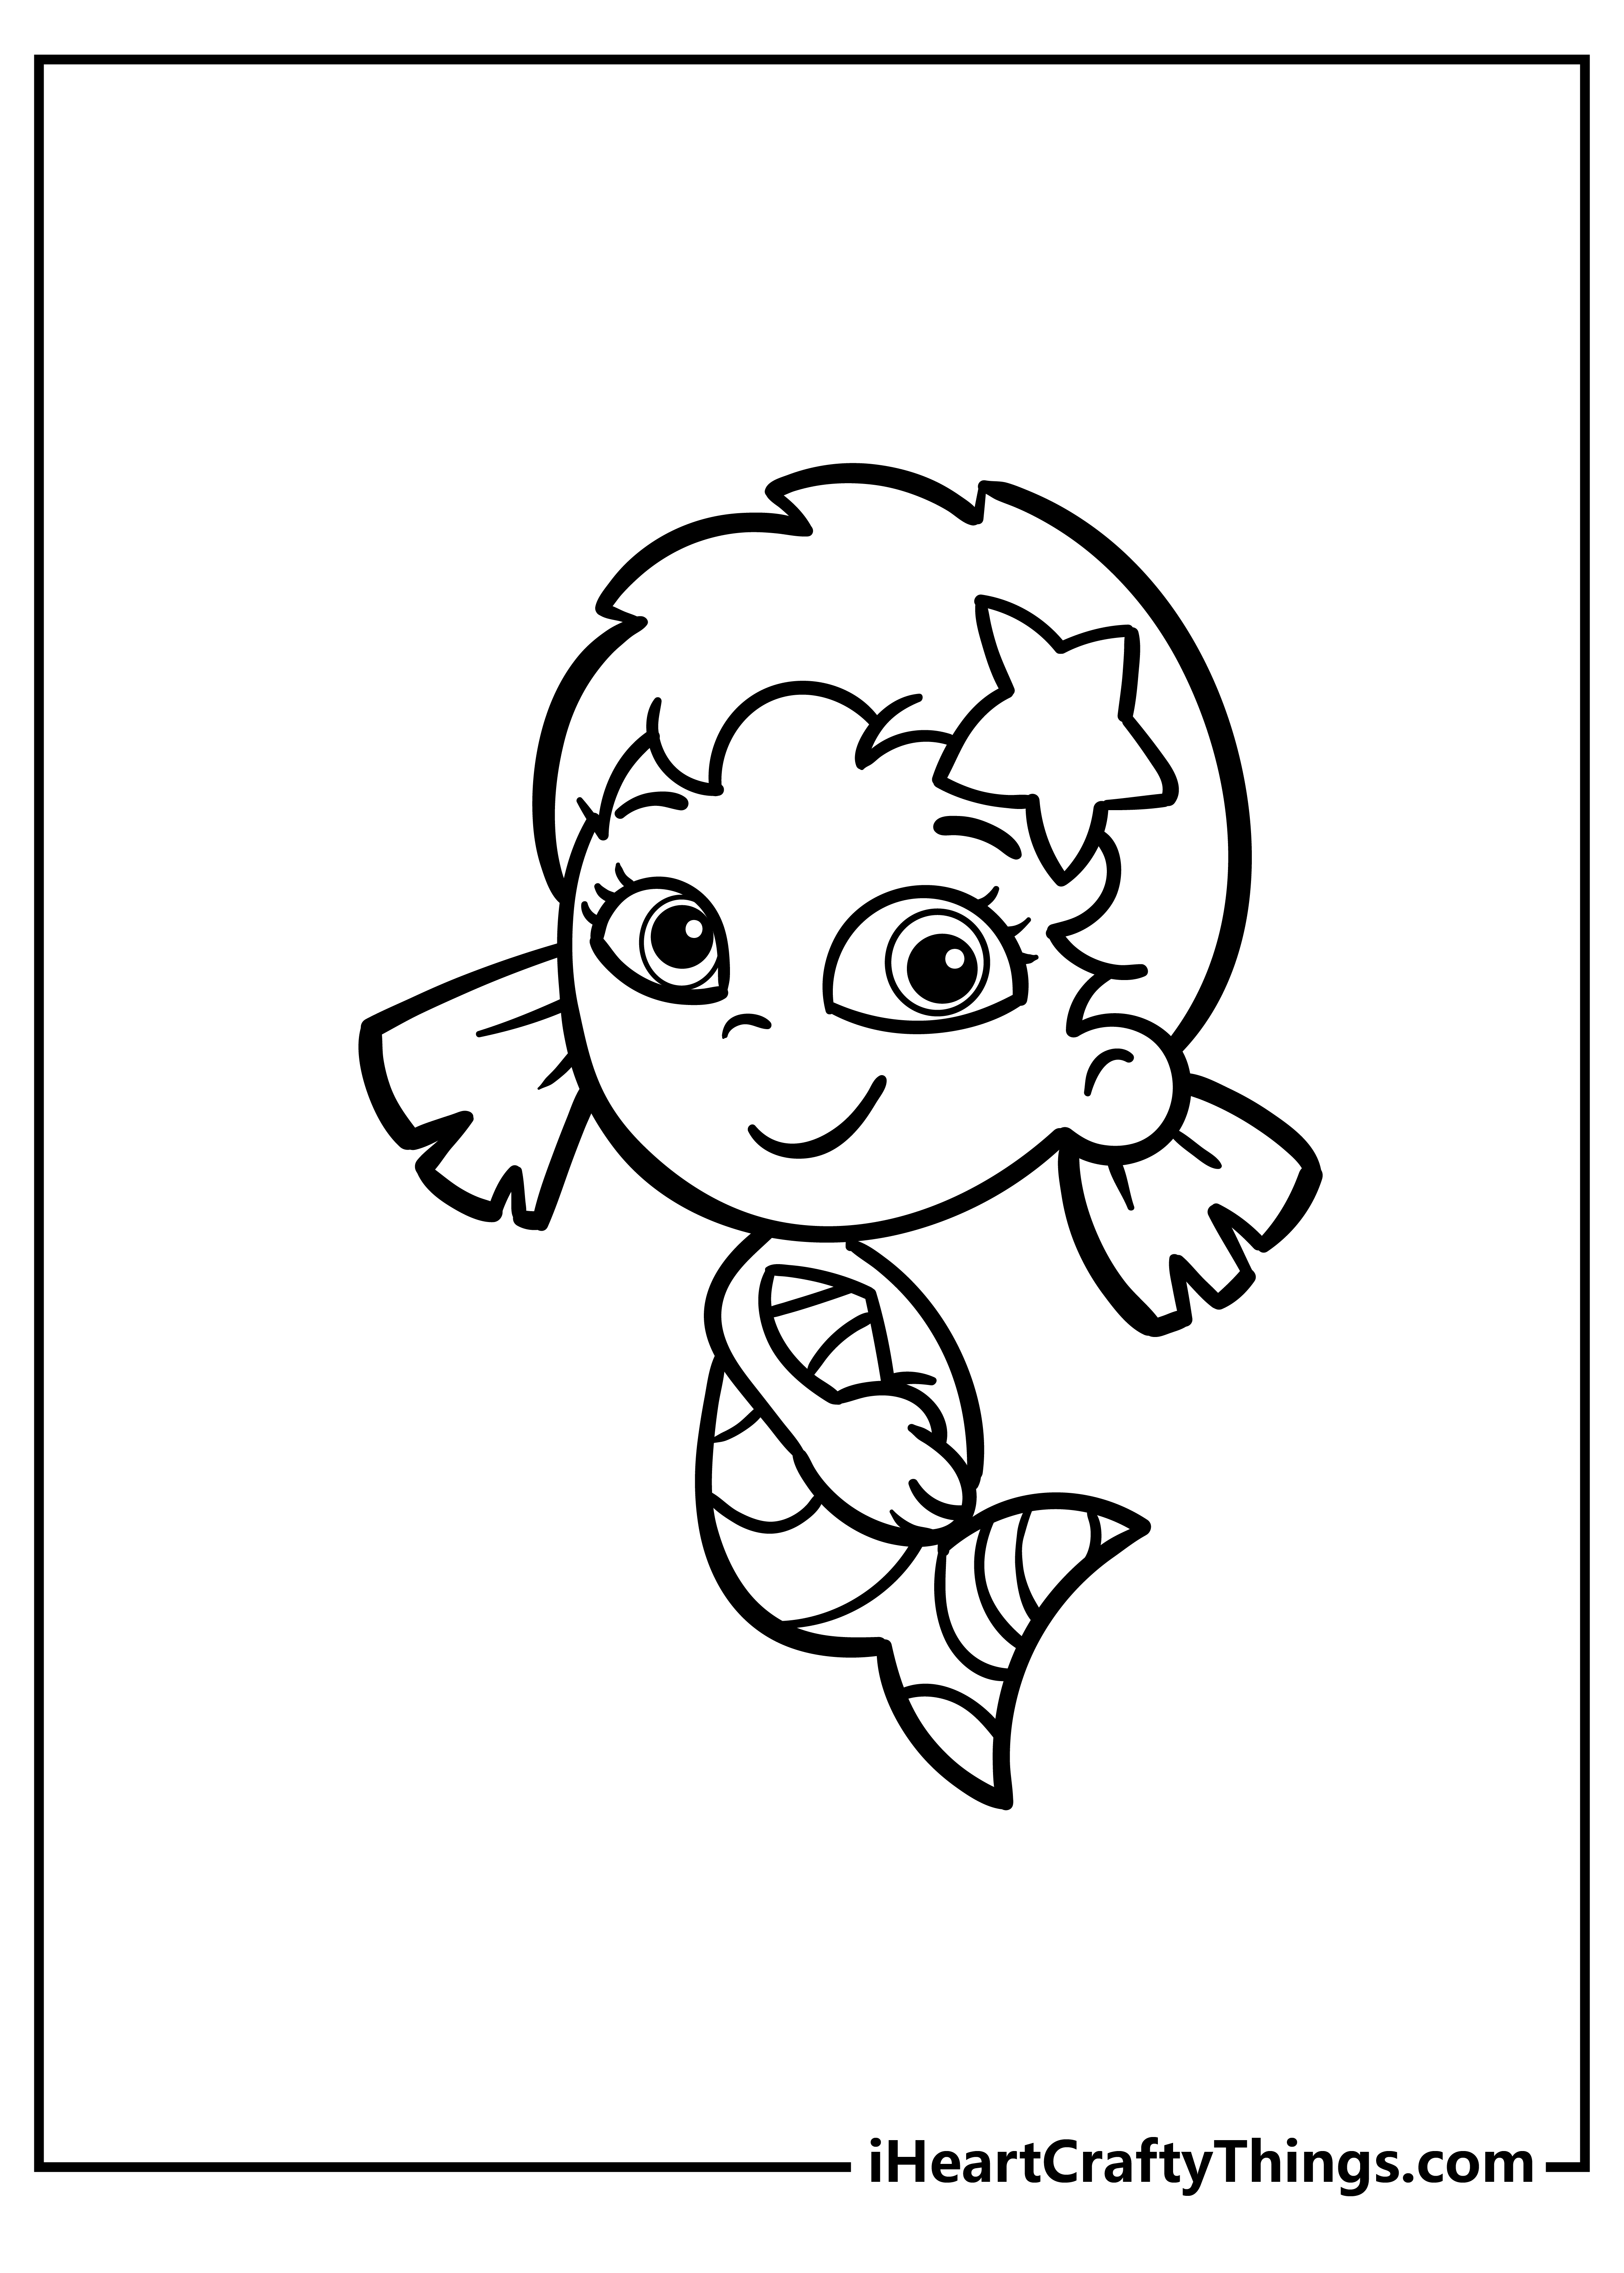 Bubble Guppies Coloring Book free printable